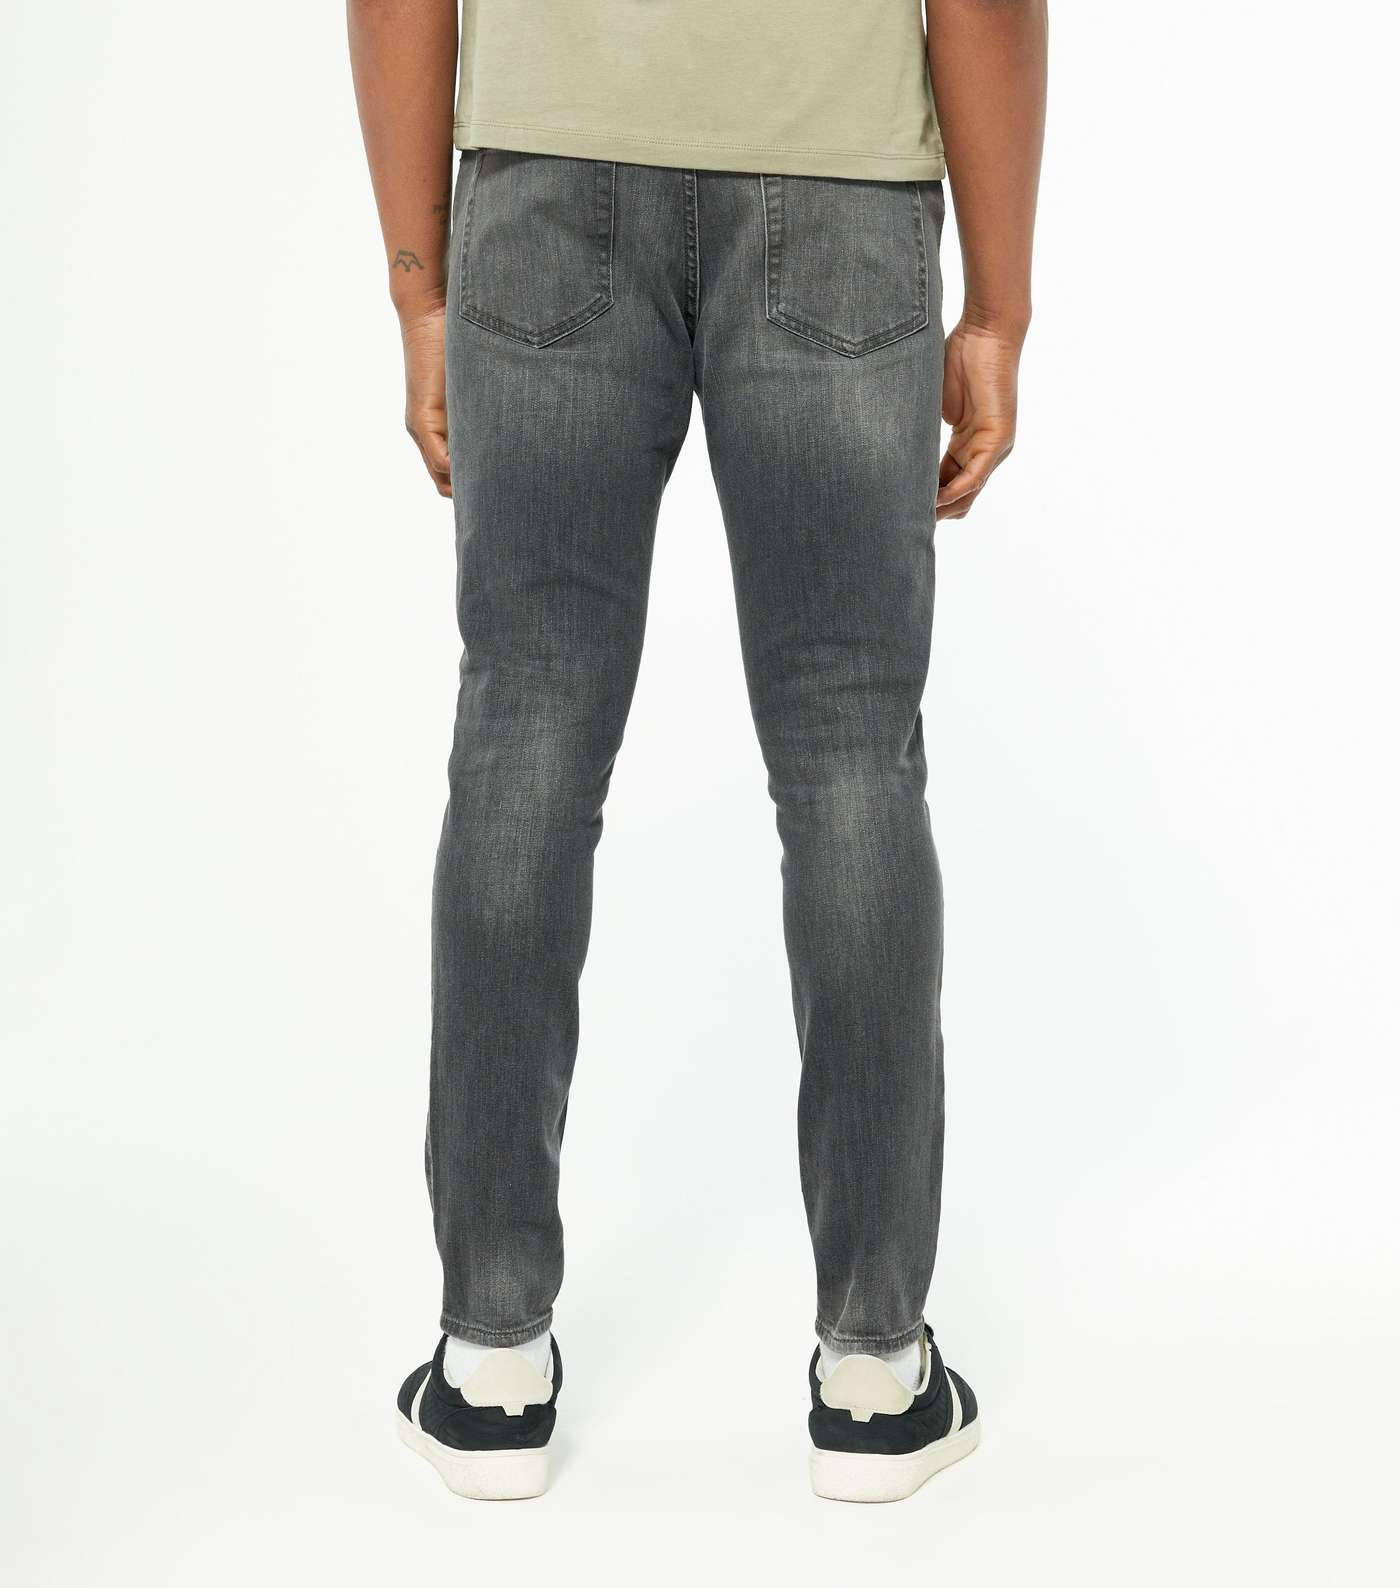 Pale Grey Washed Skinny Stretch Jeans Image 4